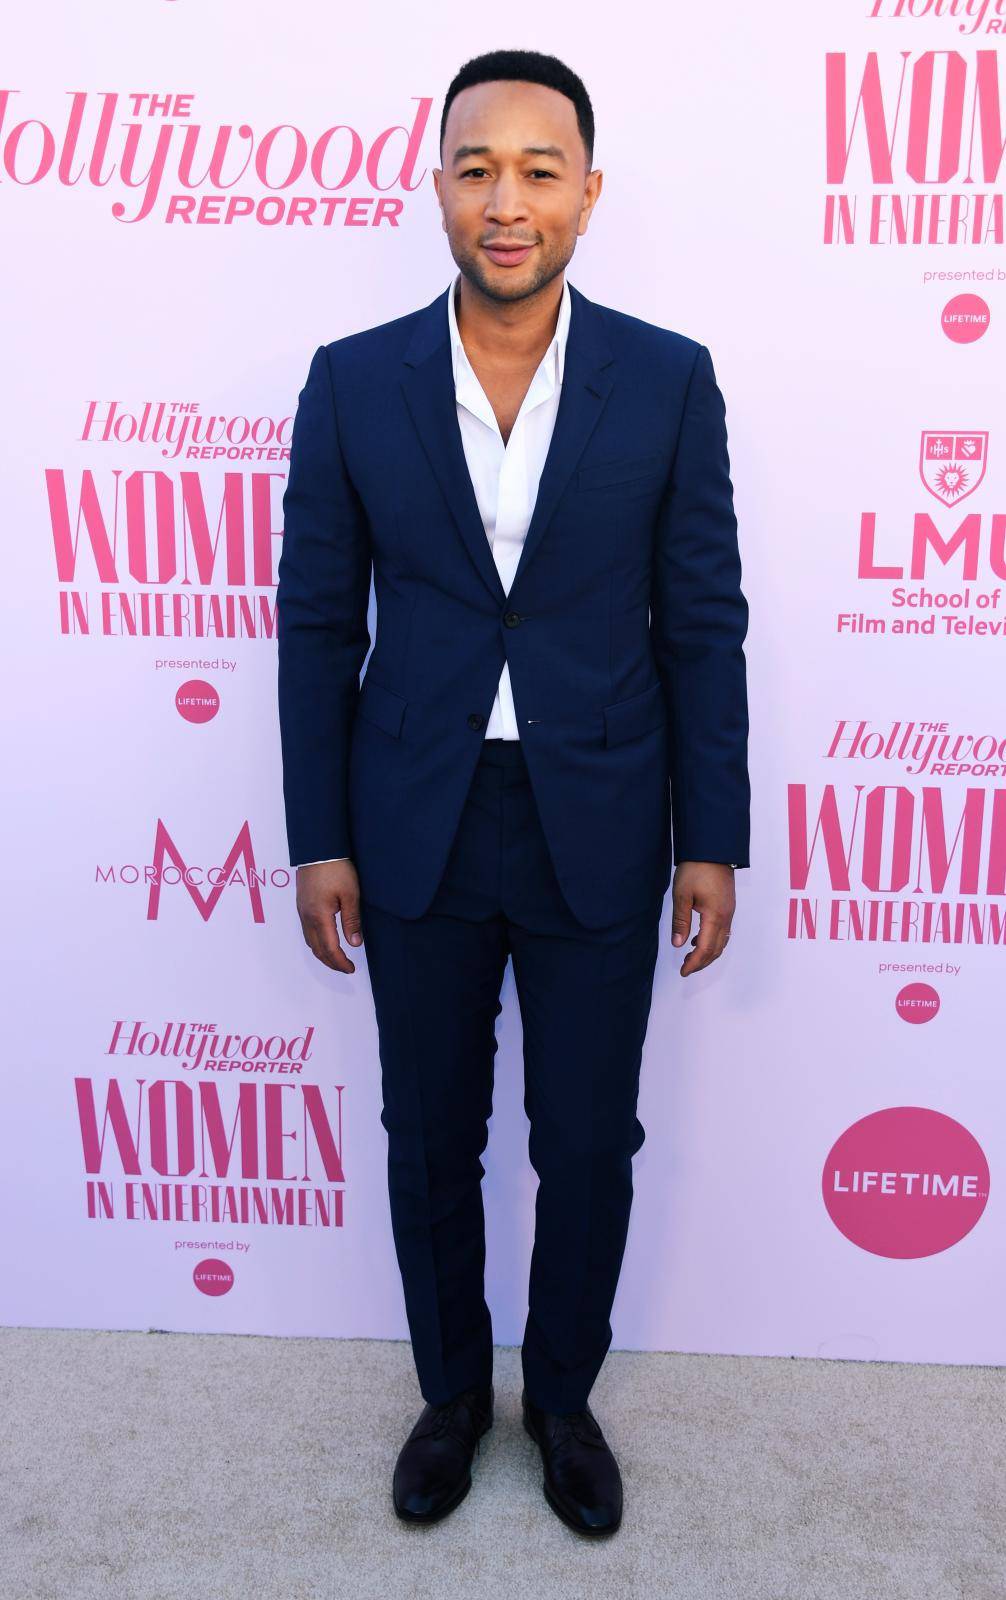 John Legend attends the Hollywood Reporter's annual Women in Entertainment Breakfast Gala in Los Angeles